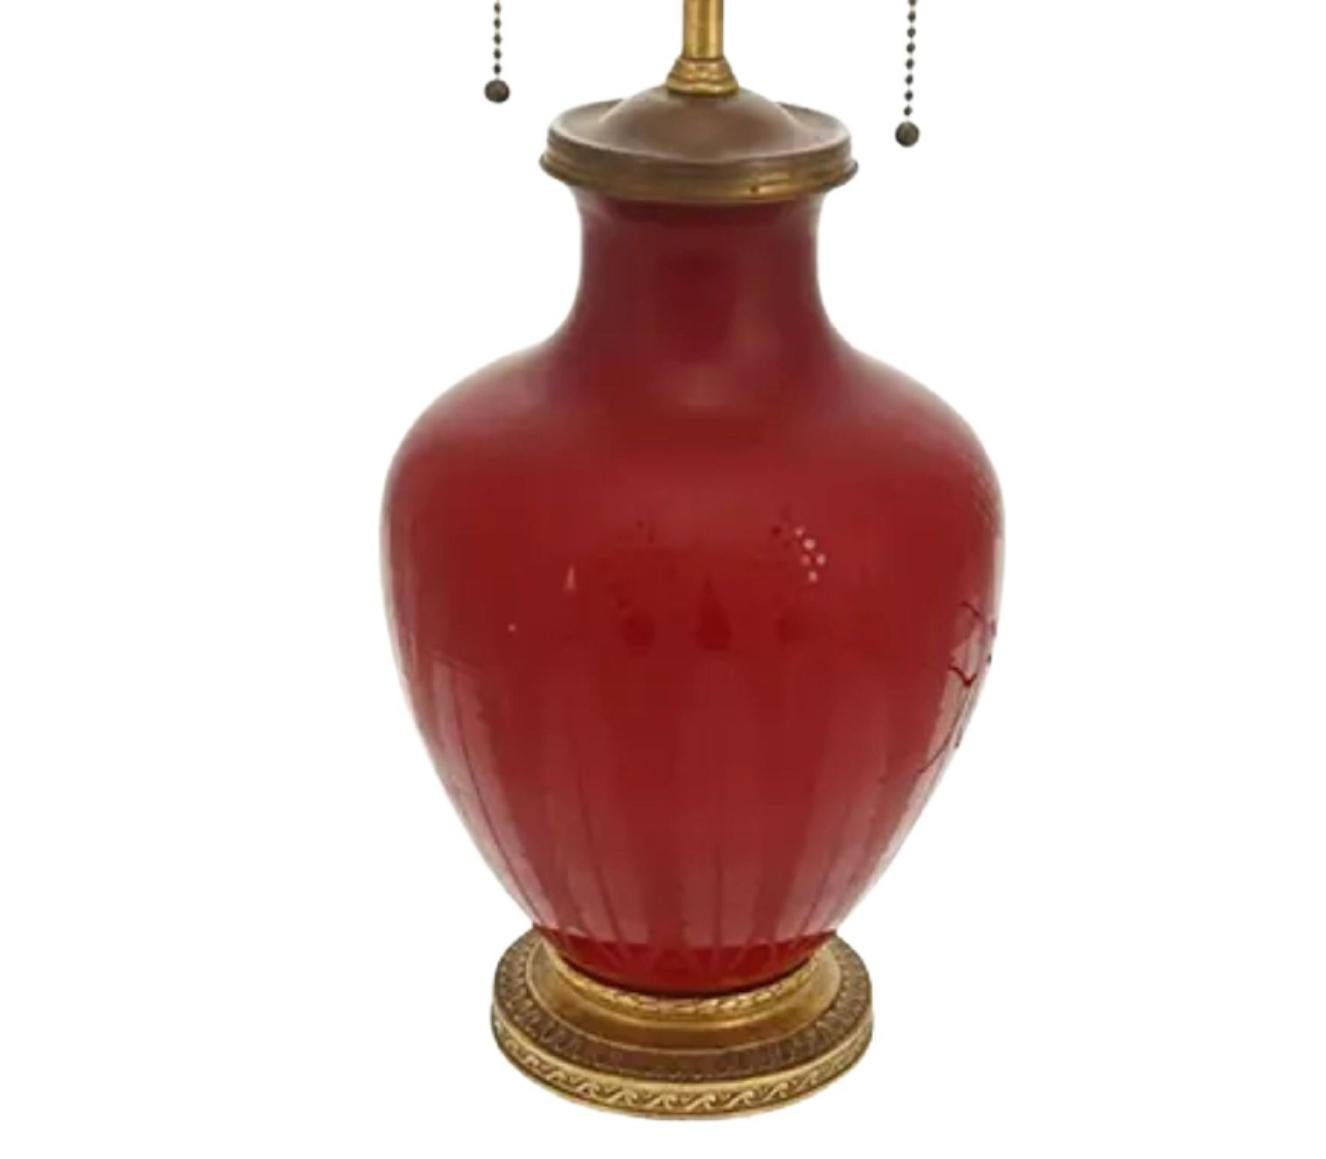 Antique Art Deco Steuben Red Acid Etched Glass Lamp, 1920s In Good Condition For Sale In LOS ANGELES, CA